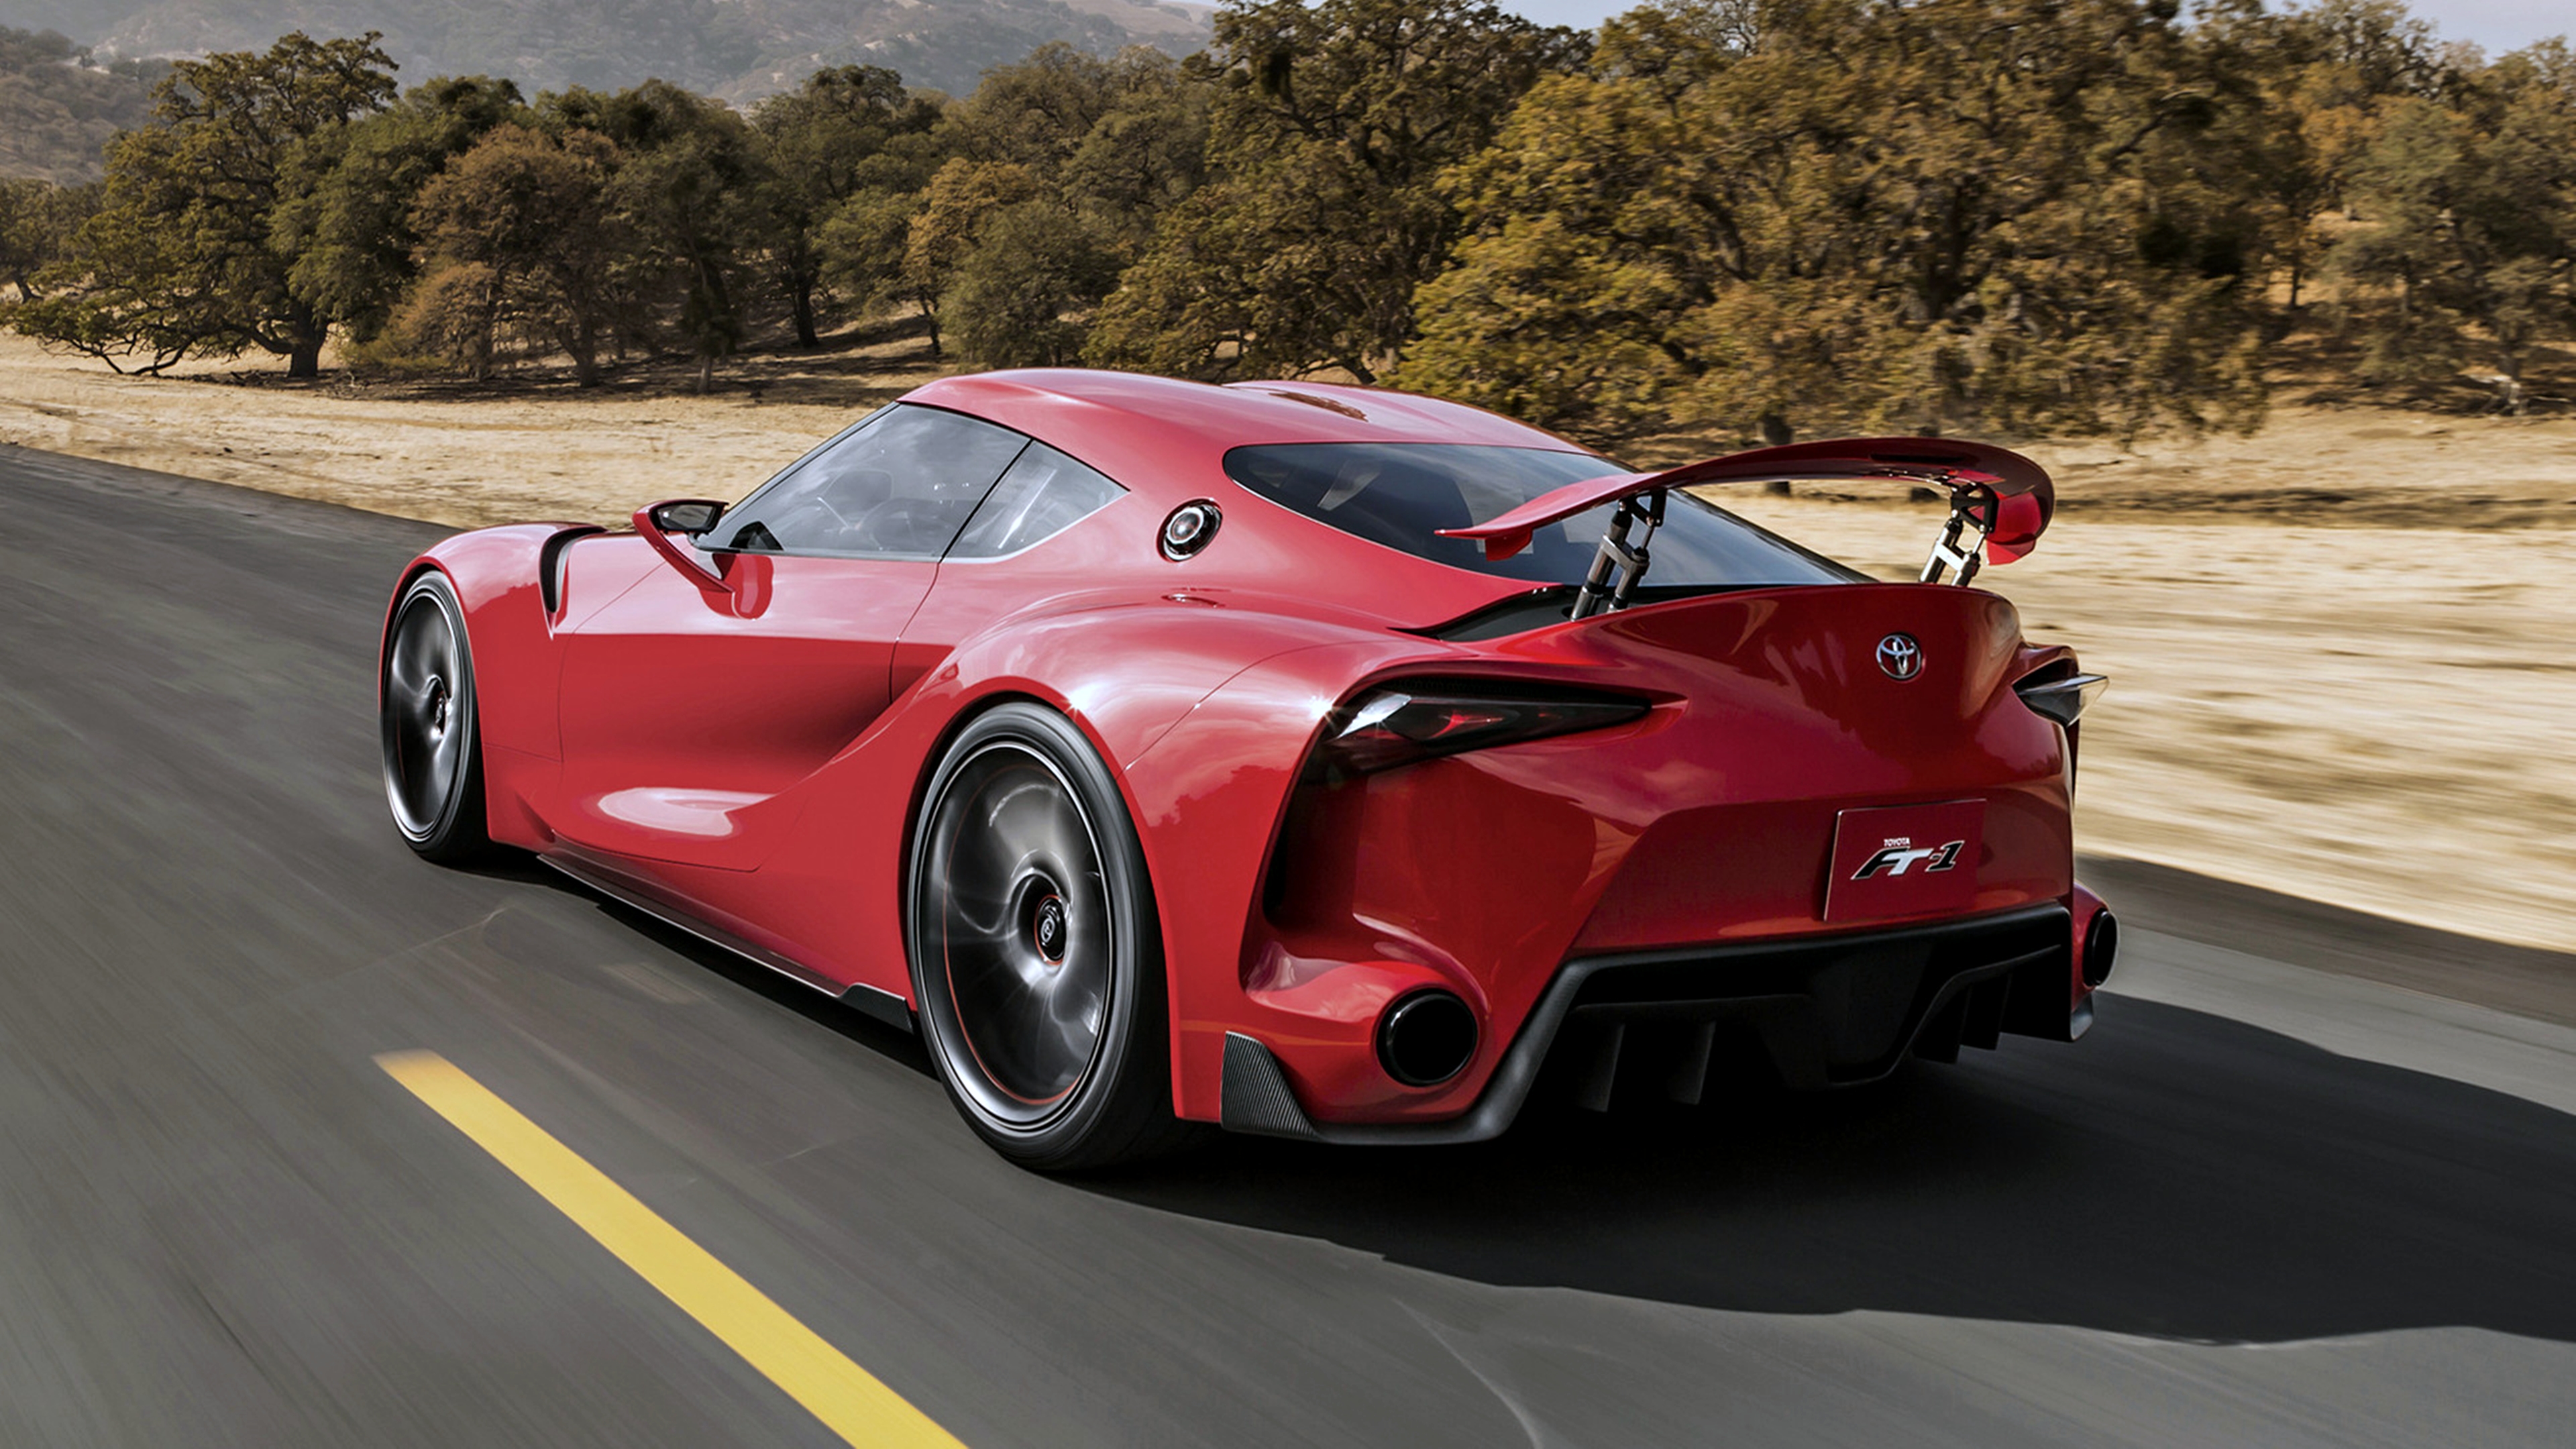 Supercar Car Toyota Toyota FT 1 Vehicle Concept Car Red Car 3840x2160